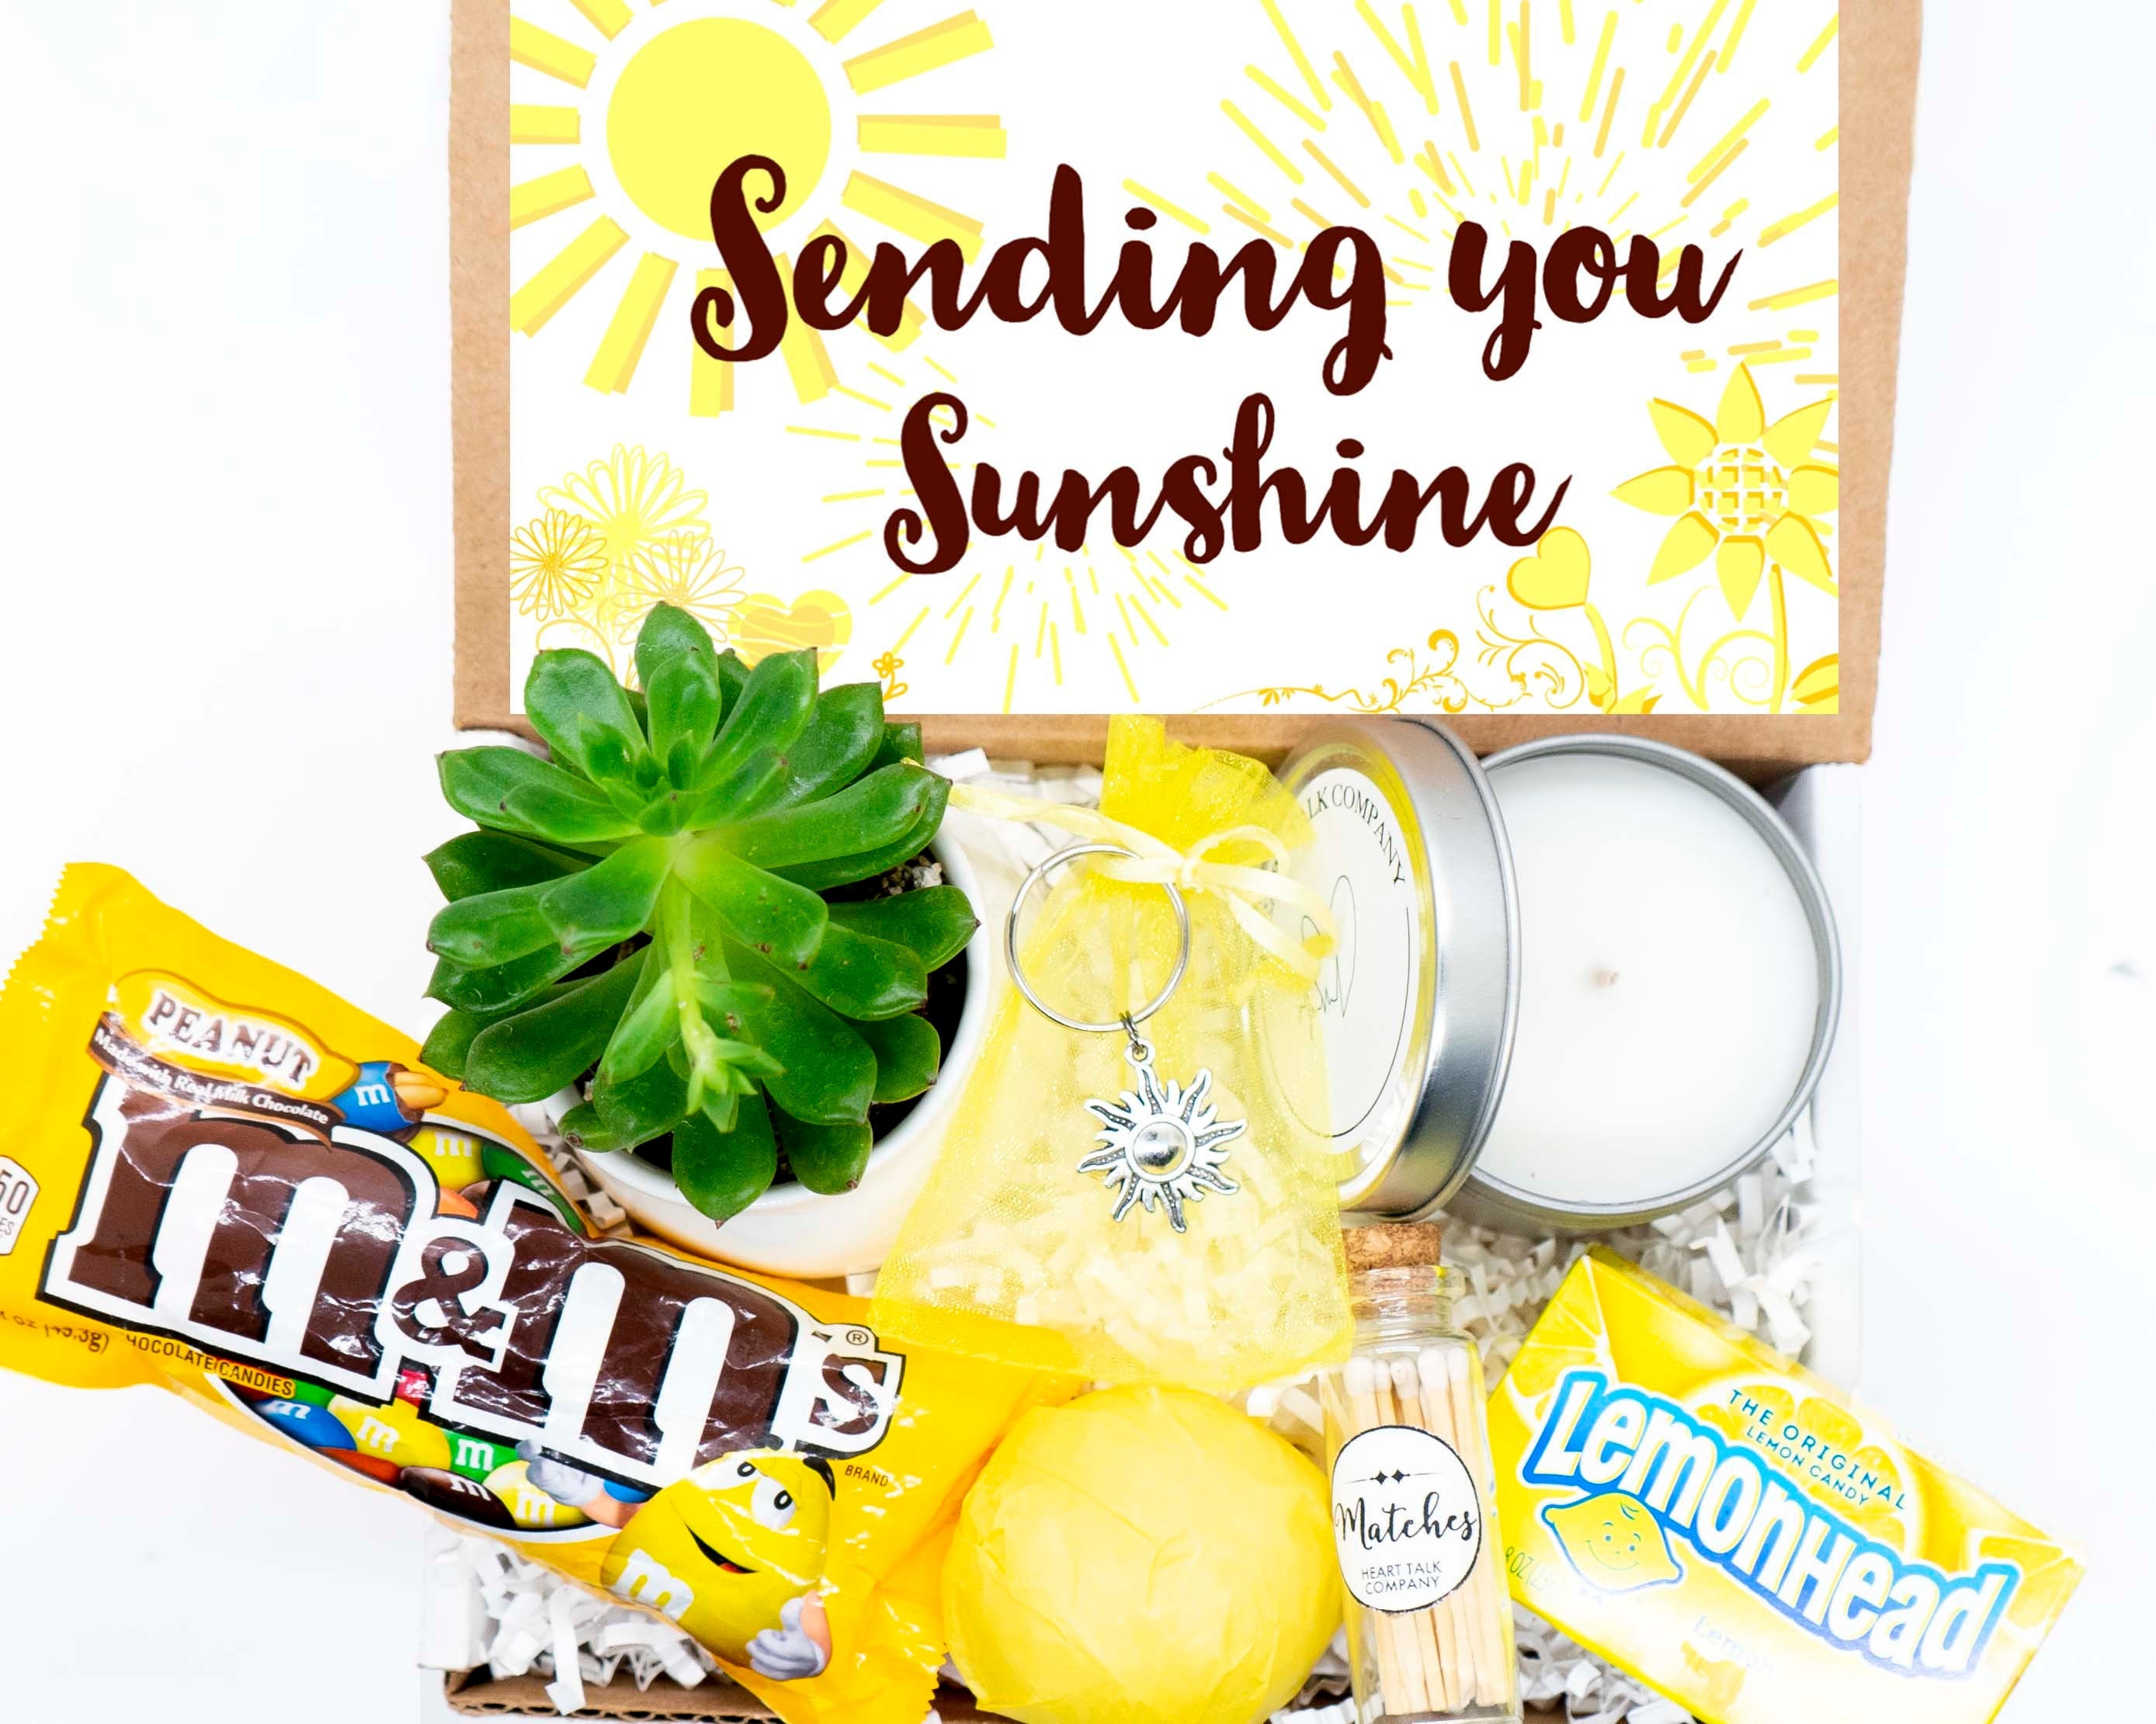  Birthday Gifts for Women, Sunflower Gifts Sending Sunshine  Christmas Gifts, Get Well Soon Gifts Basket Care Package Unique Relaxation  Gifts Box for Thinking of You Her Sister Best Friend (#sunshine1) 